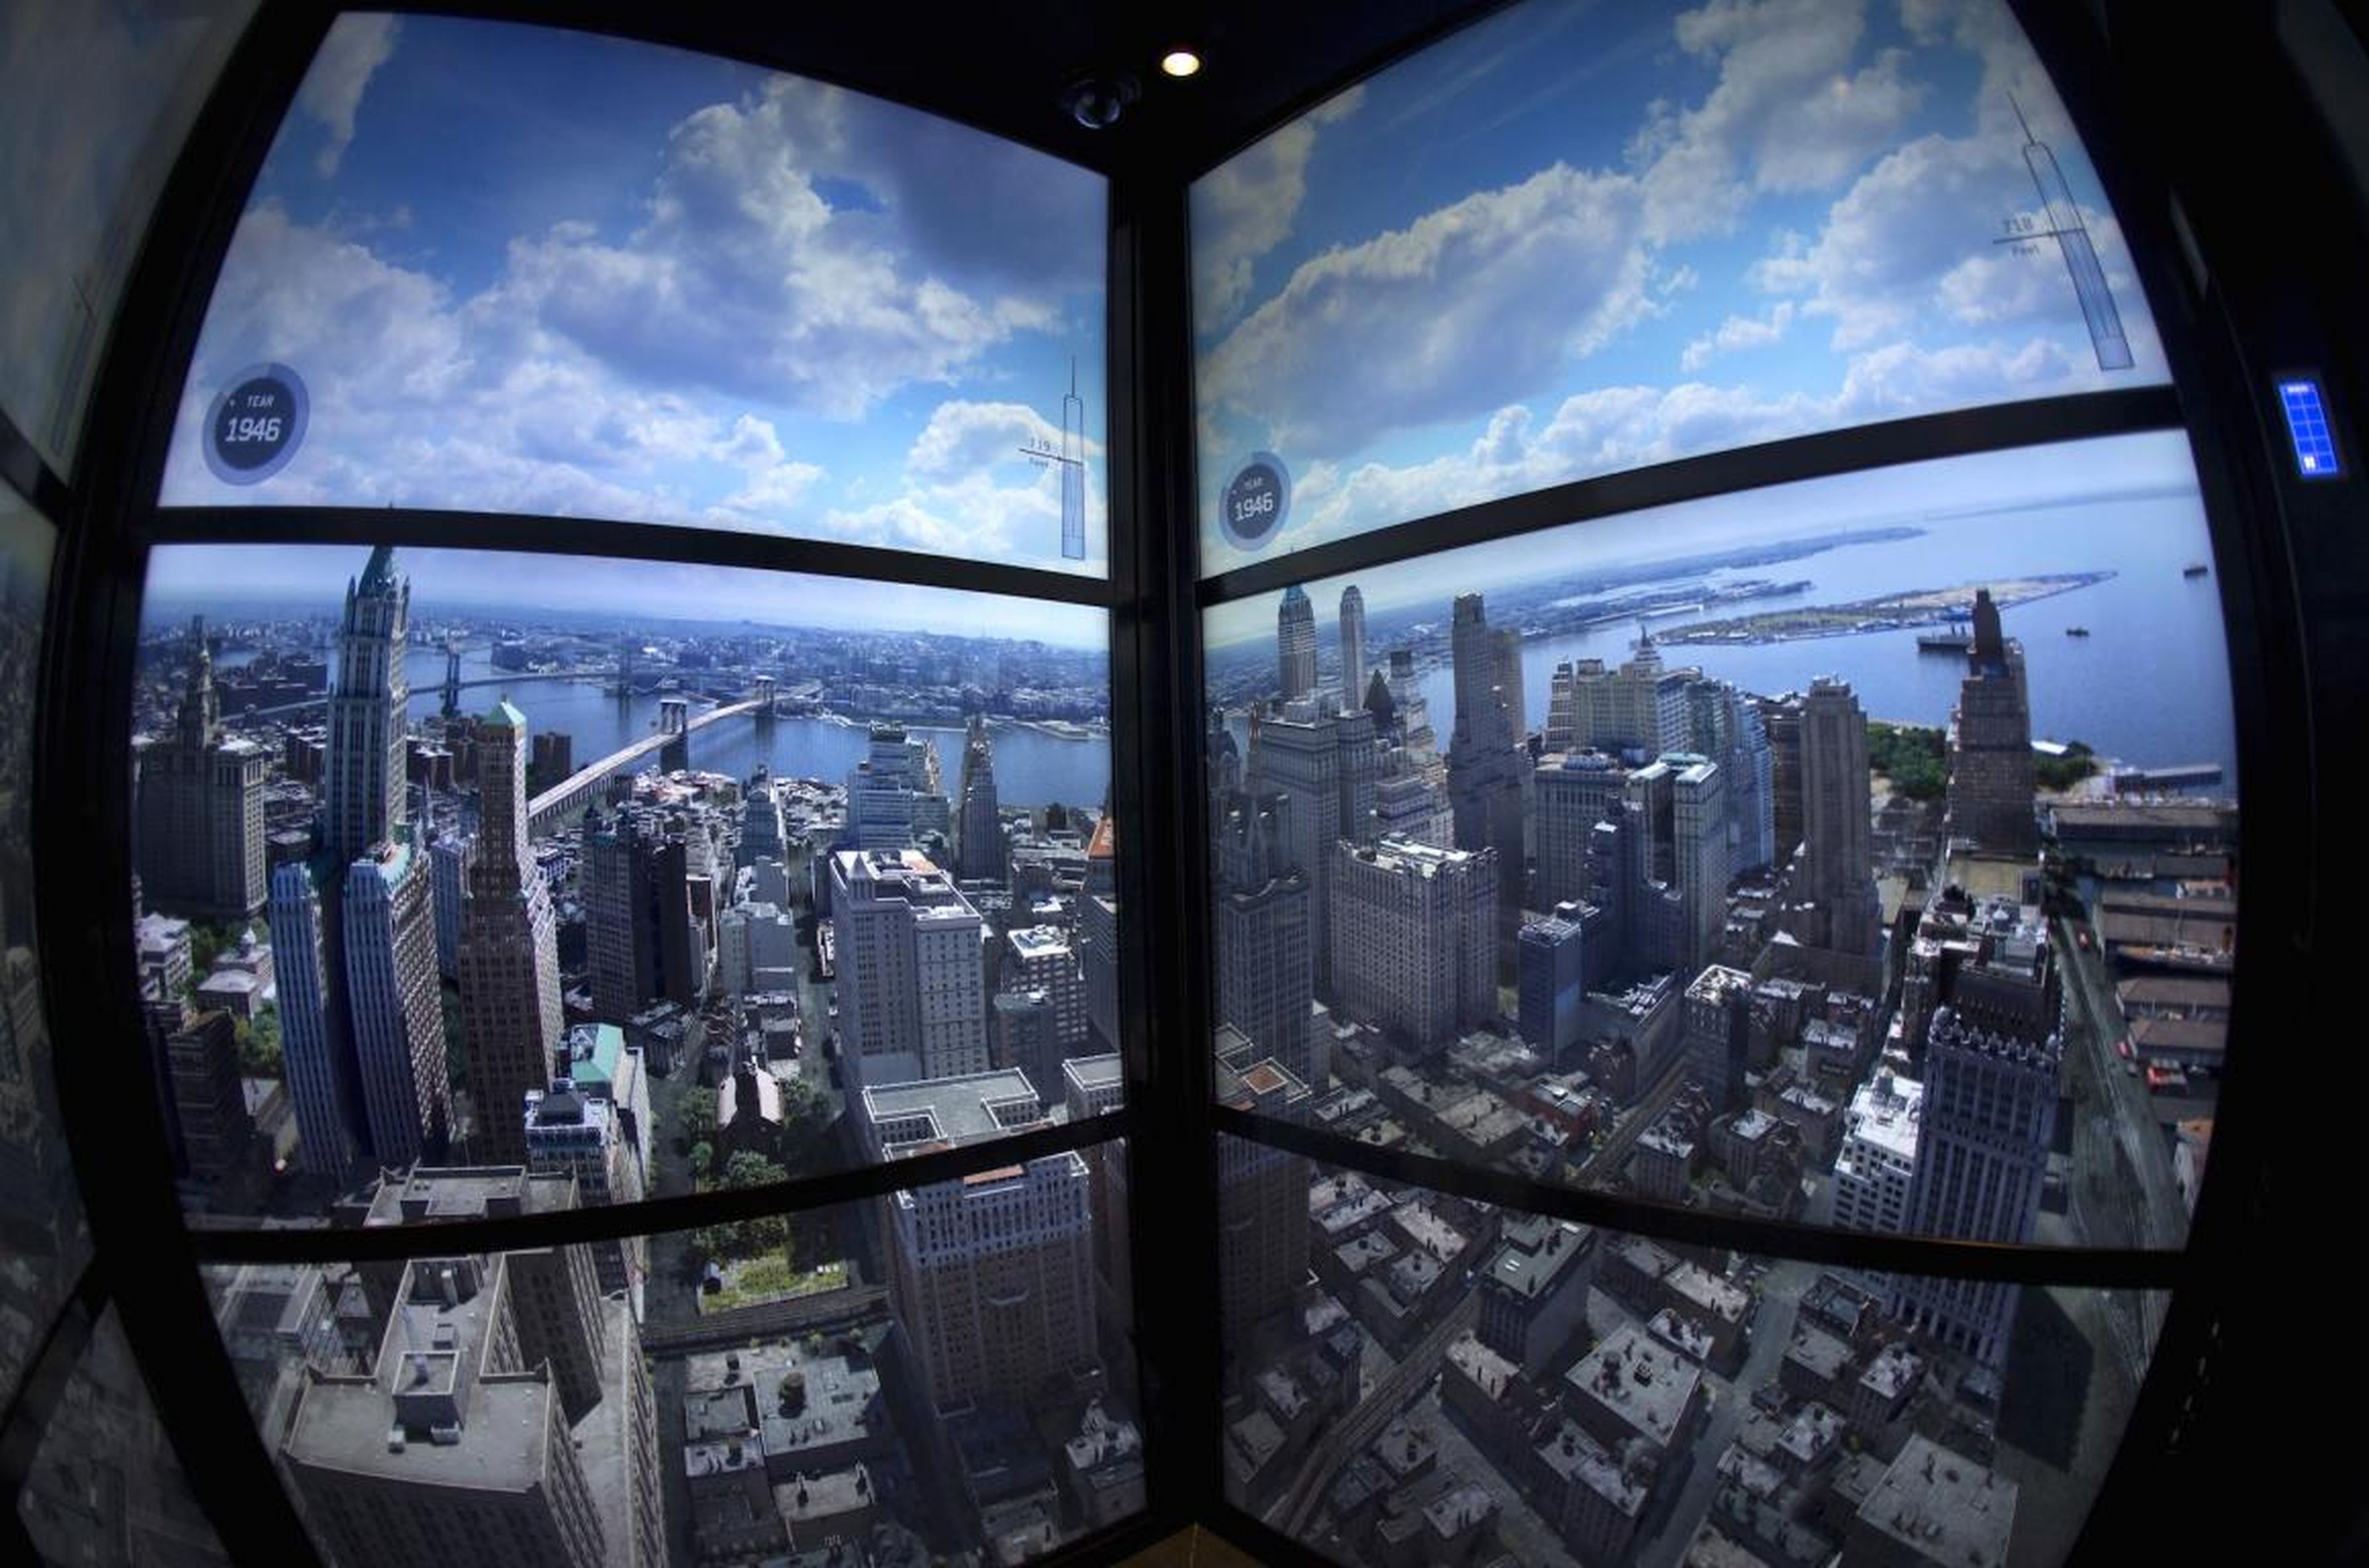 Part of a time-lapse projection of the New York skyline through the years is seen inside the Sky Pod Elevator on the way up to the One World Observatory observation deck on the 100th floor of the One World Trade center tower in New York.